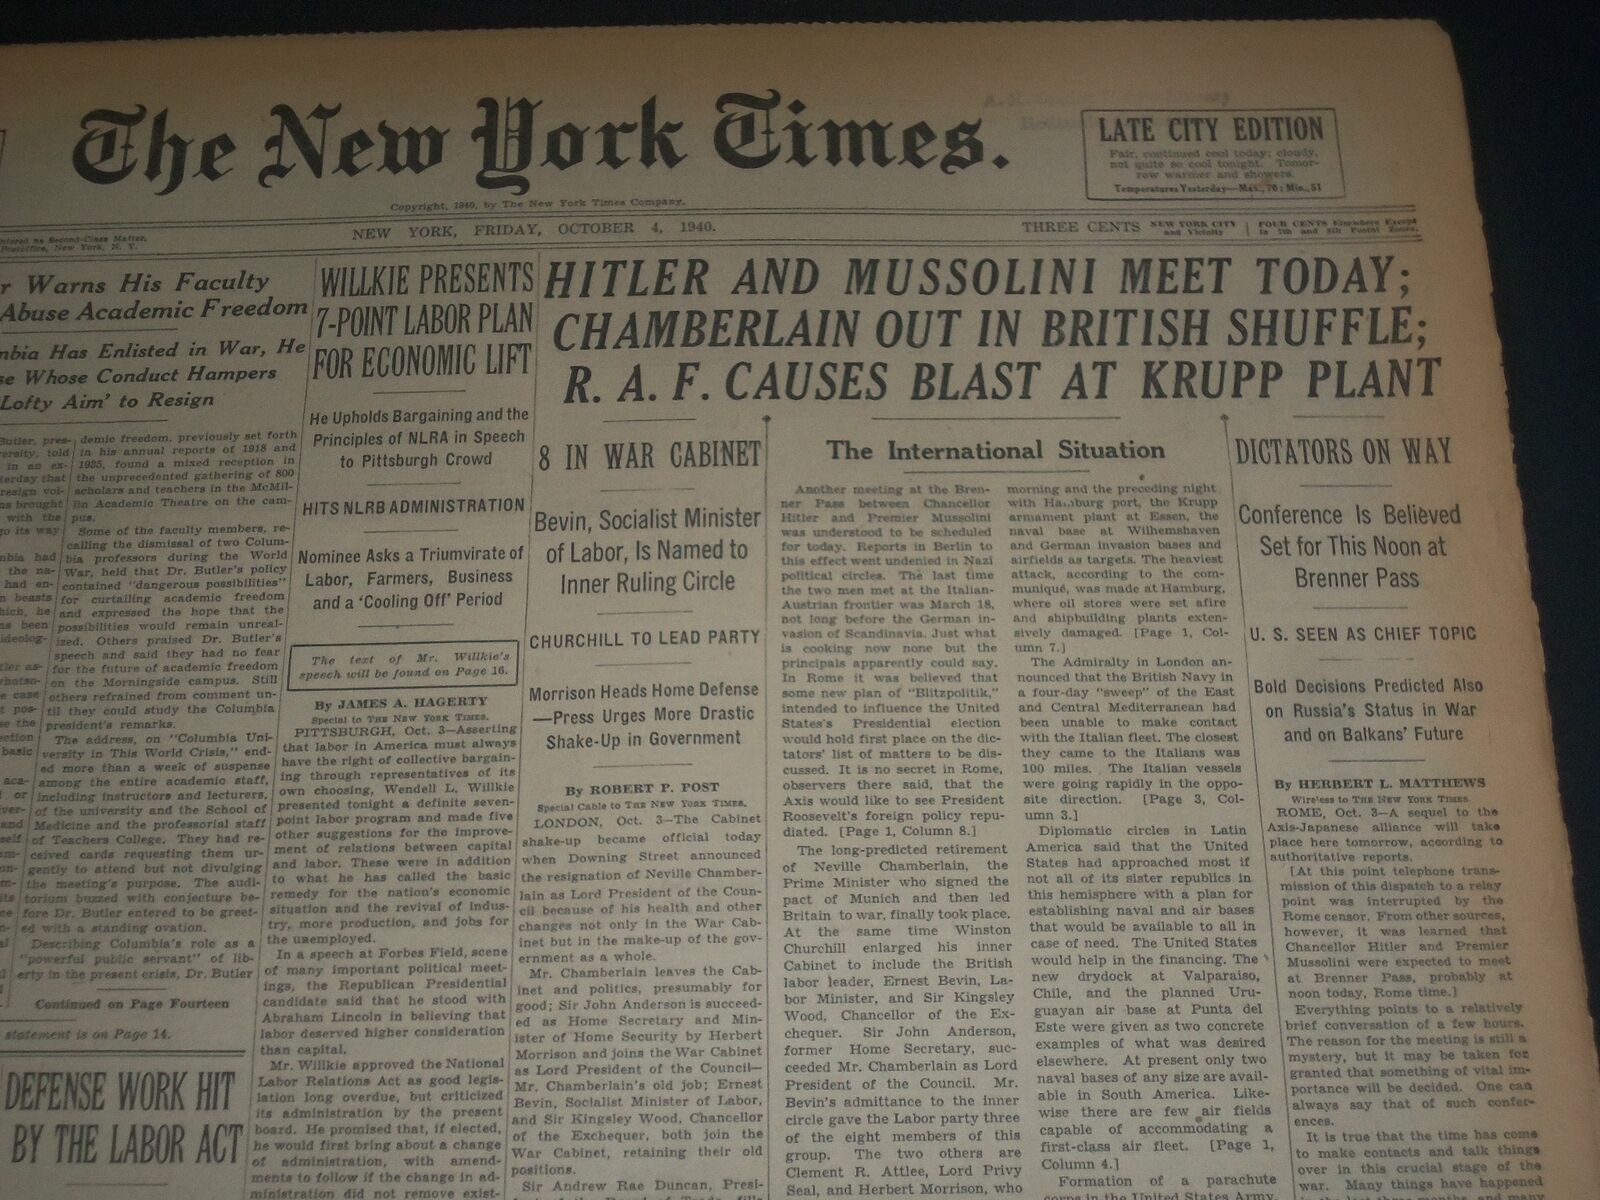 1940 OCTOBER 4 NEW YORK TIMES - HITLER AND MUSSOLINI MEET TODAY - NT 7339